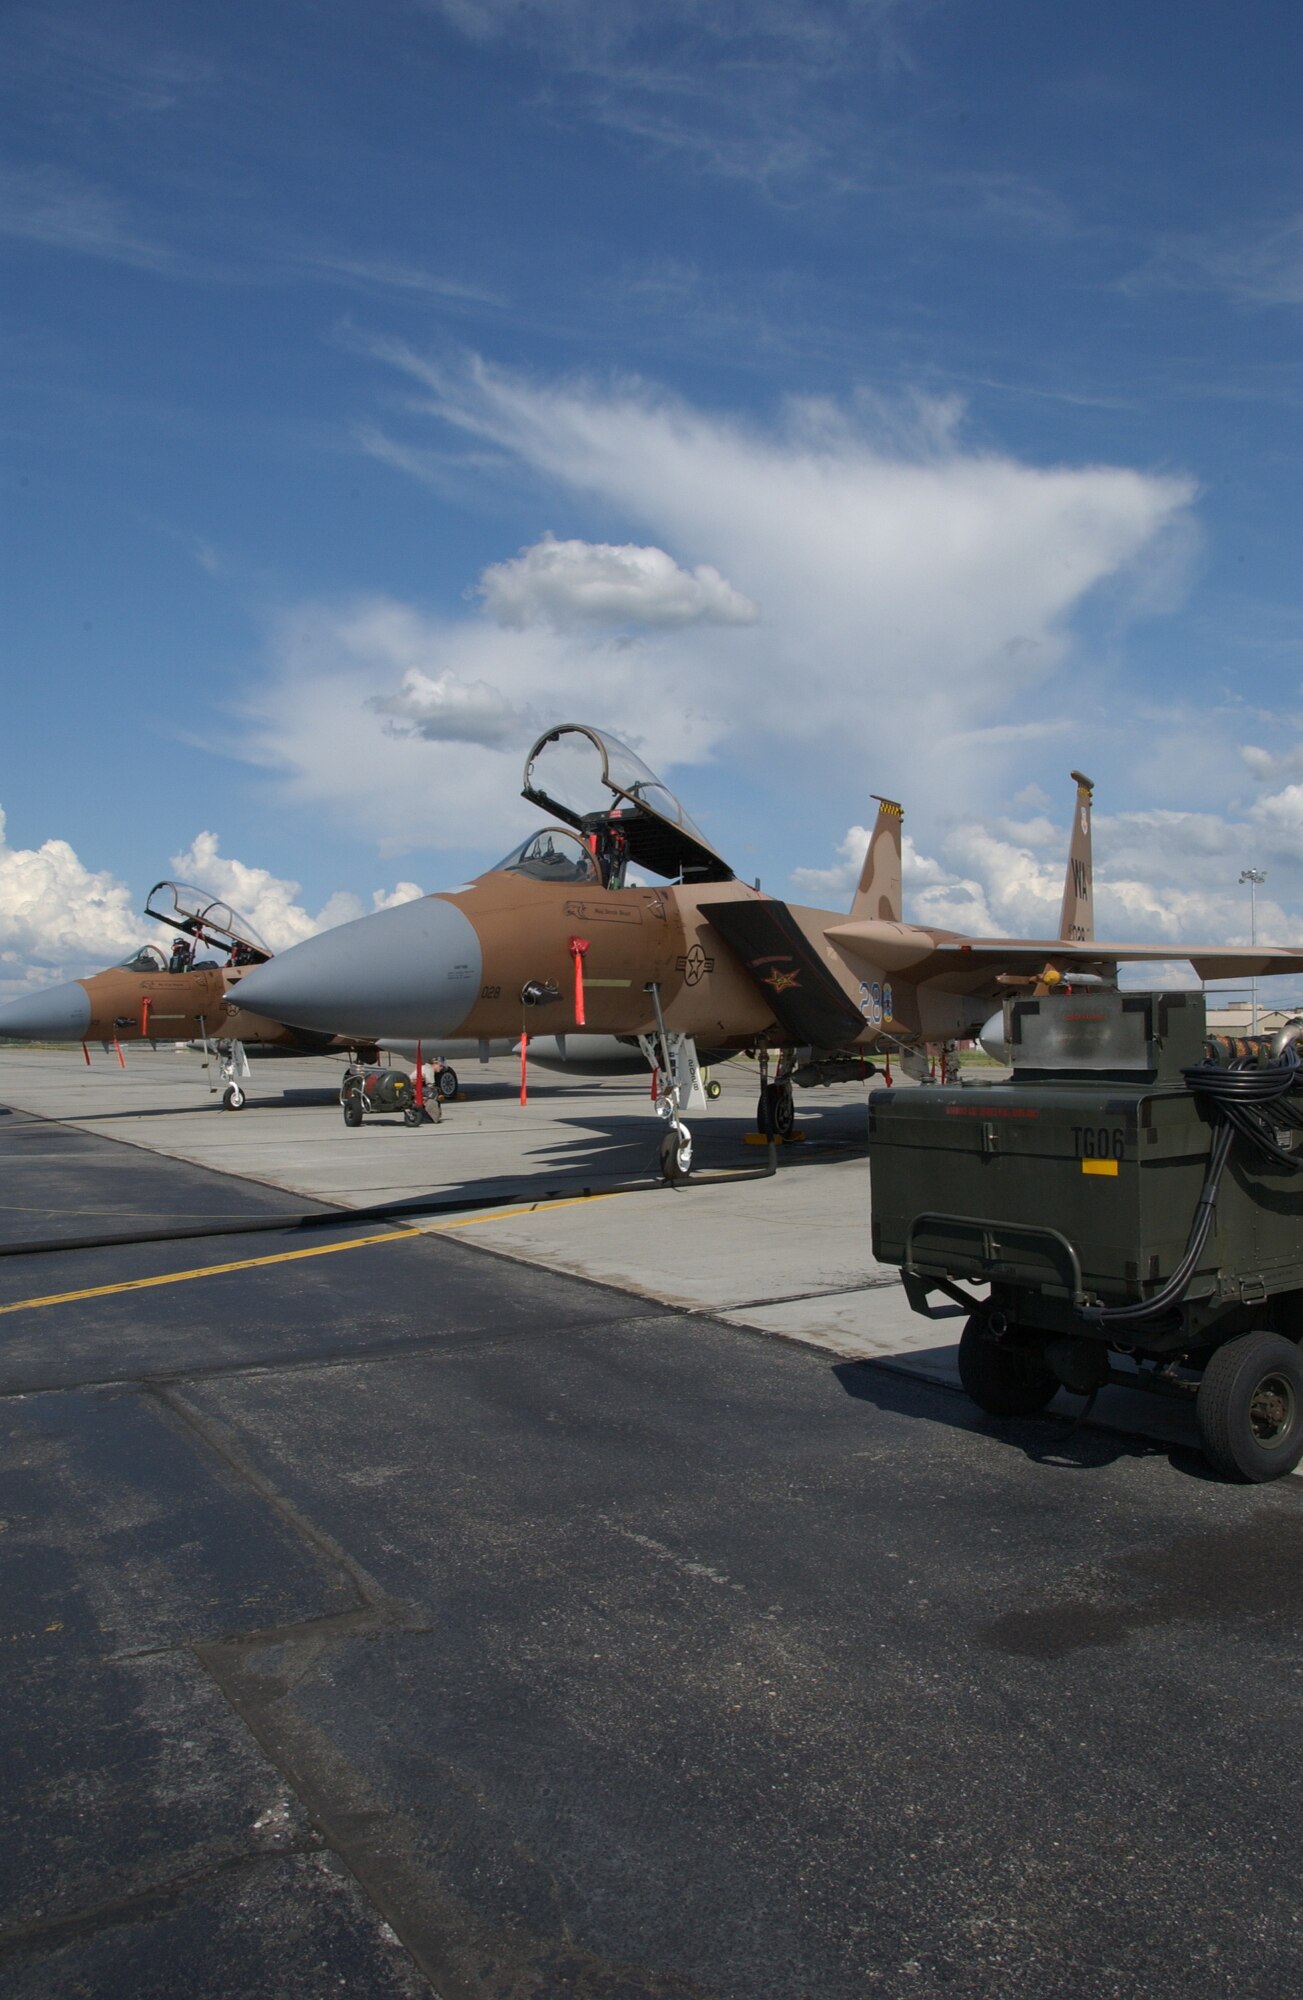 EIELSON AIR FORCE BASE, Alaska -- An F-15C Aggressor from 65th Aggressor Squadron, Nellis AFB, Nev., sits on the Eielson AFB, Alaska flight line July 9. The 65th AGS is taking part in Red Flag-Alaska 07-3 which runs through the 2July 27.  (U.S. Air Force photo by Airman 1st Class Christopher Griffin)